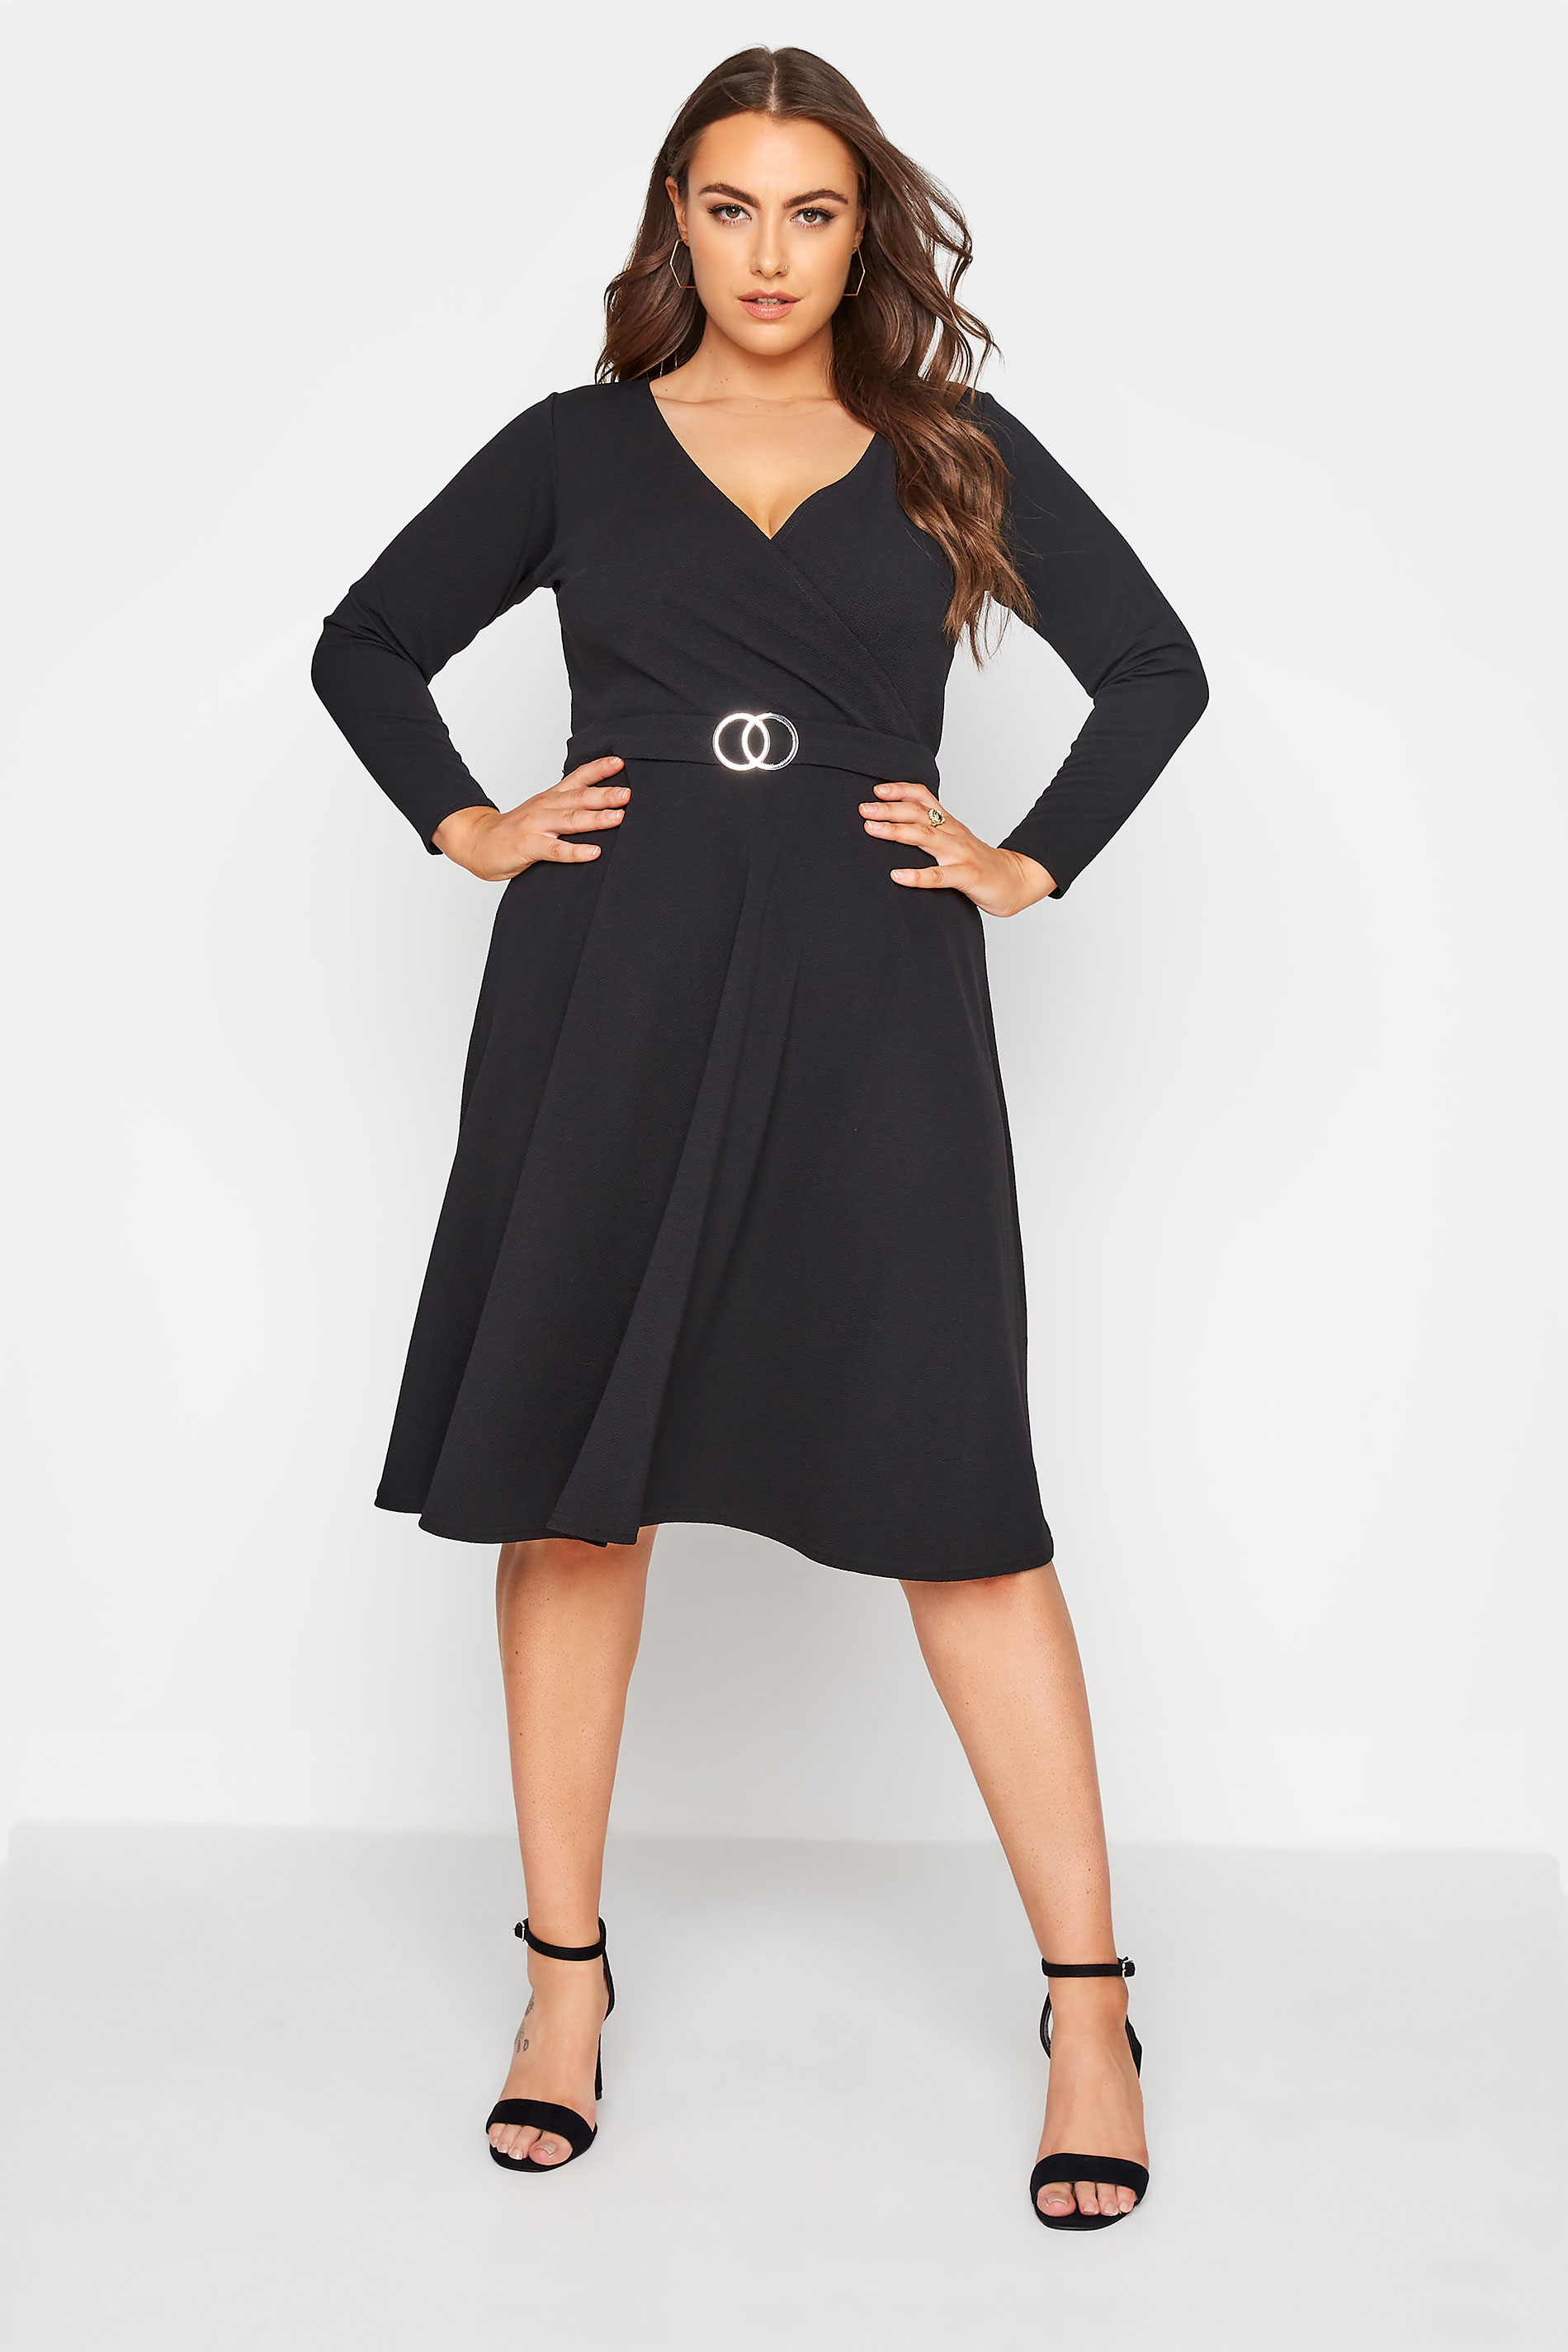 Robes Grande Taille Grande taille  Robes Noires | YOURS LONDON - Robe Noire Cache-Coeur Manches Longues - EK33060